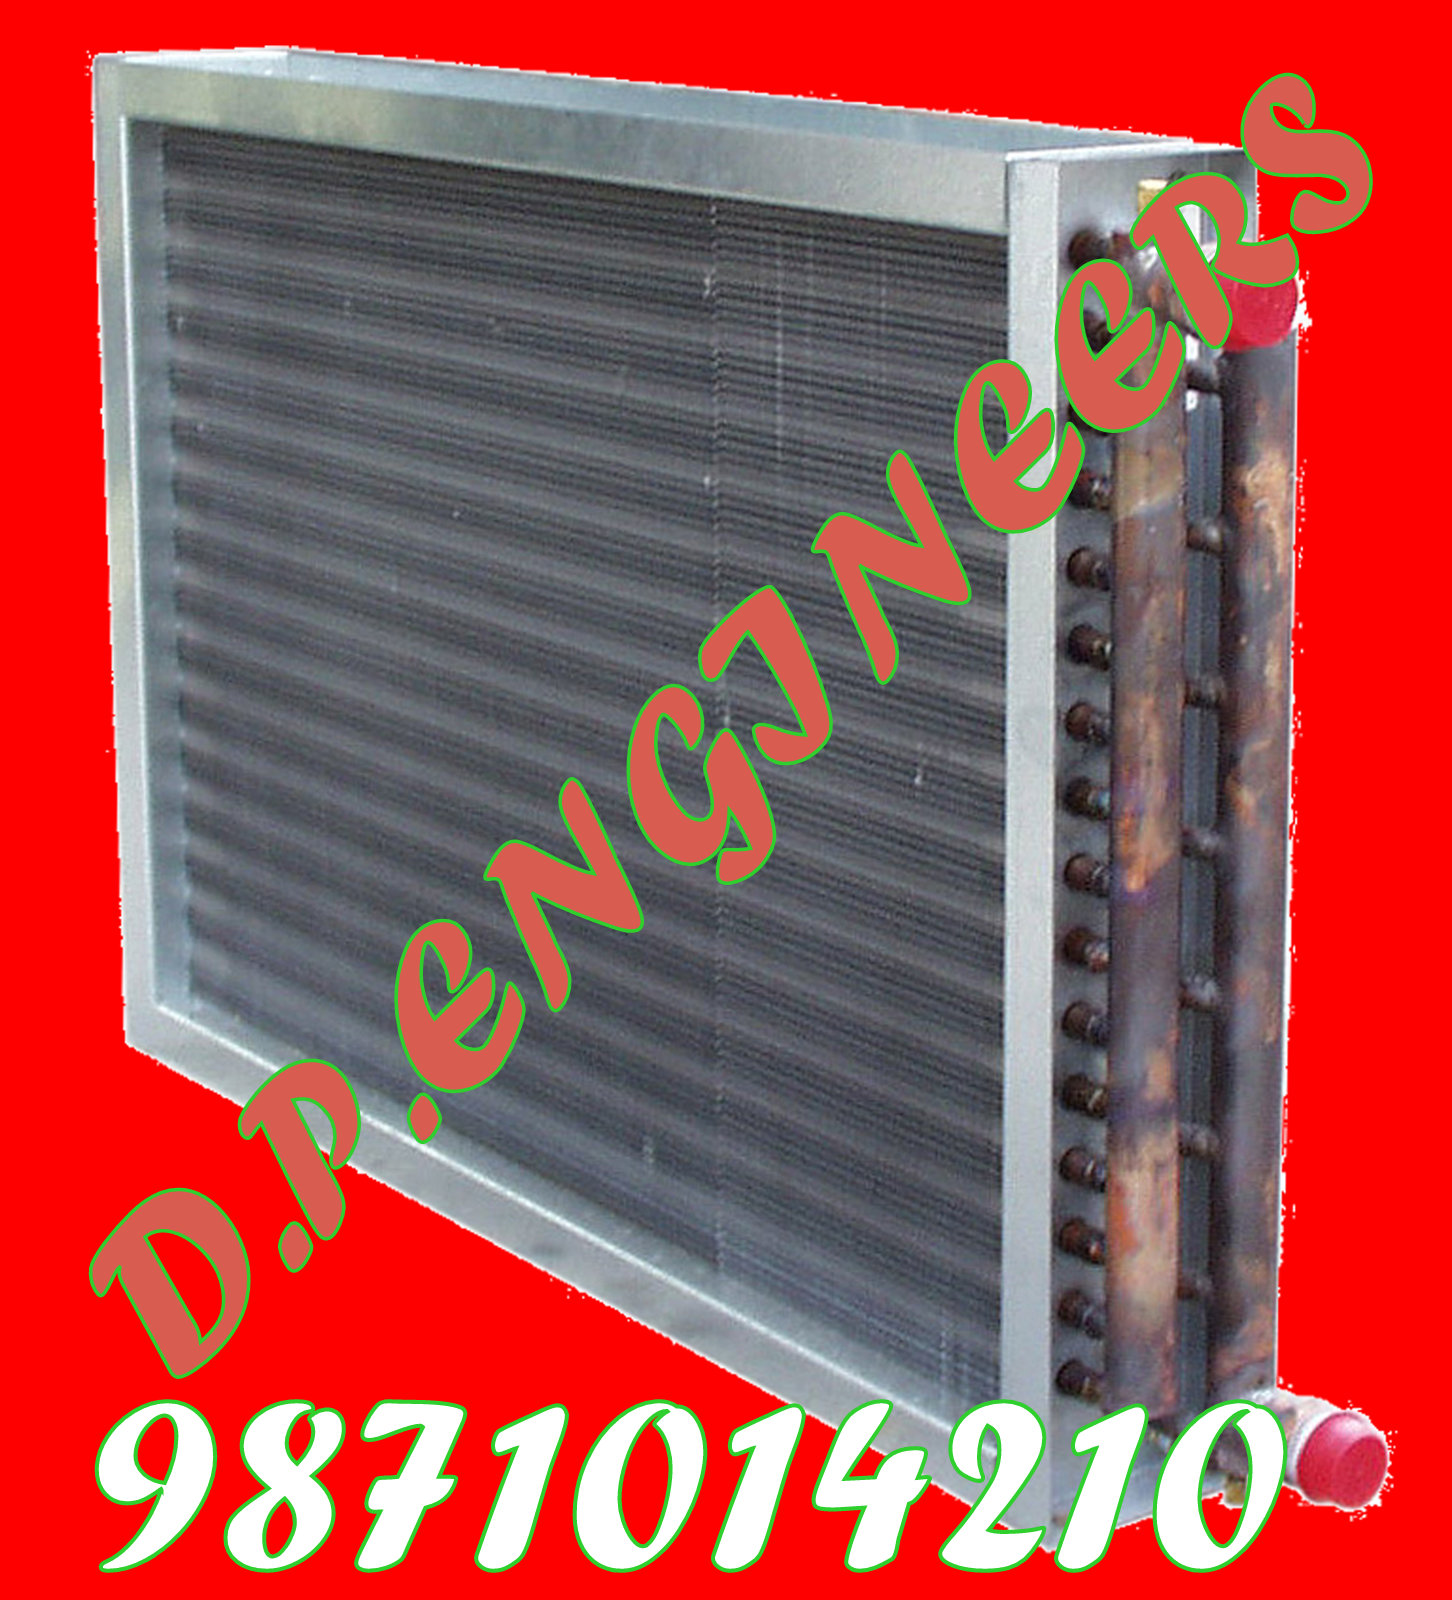 Manufacturers Exporters and Wholesale Suppliers of Hot Water Coils NR. Aggarwal Sweet Delhi